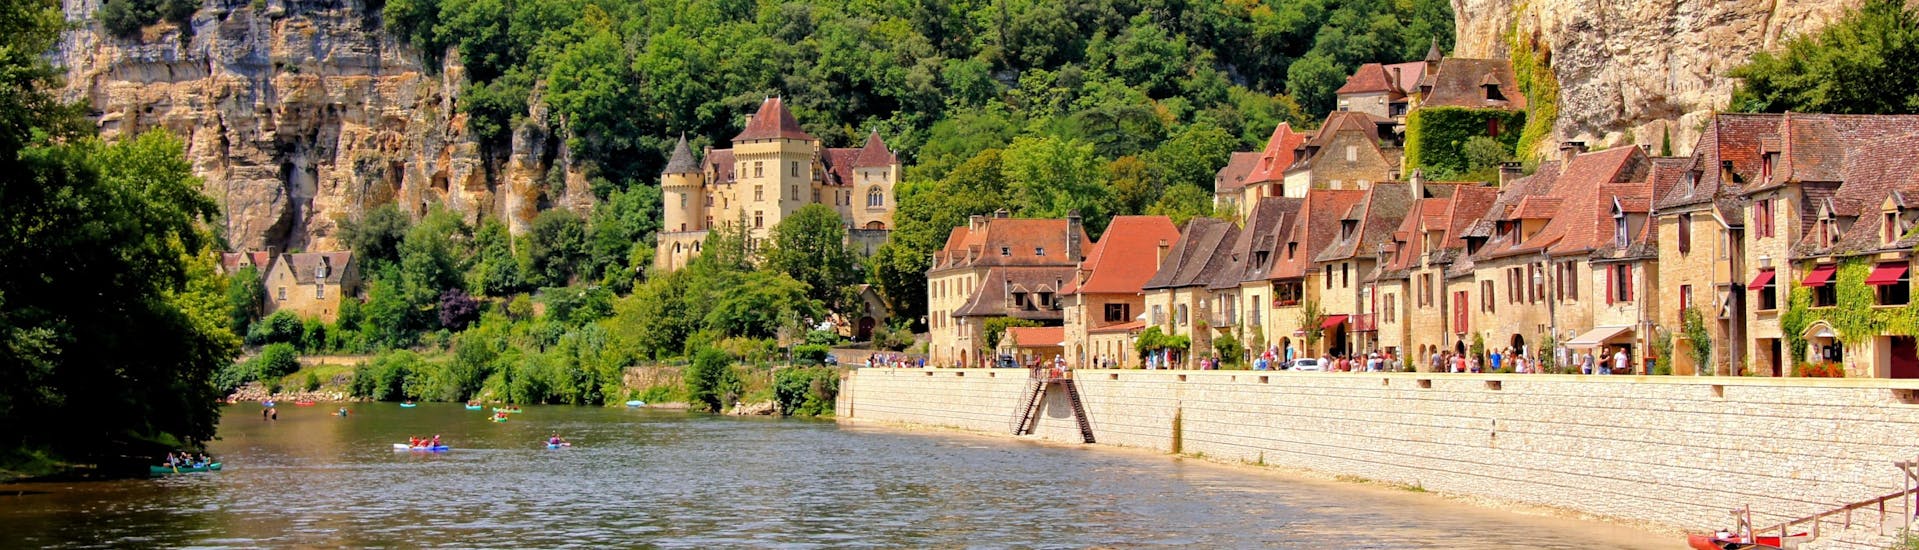 Beautiful view of the village of La Roque-Gageac on the Dordogne River on which tourists tourists do canoeing during summer.